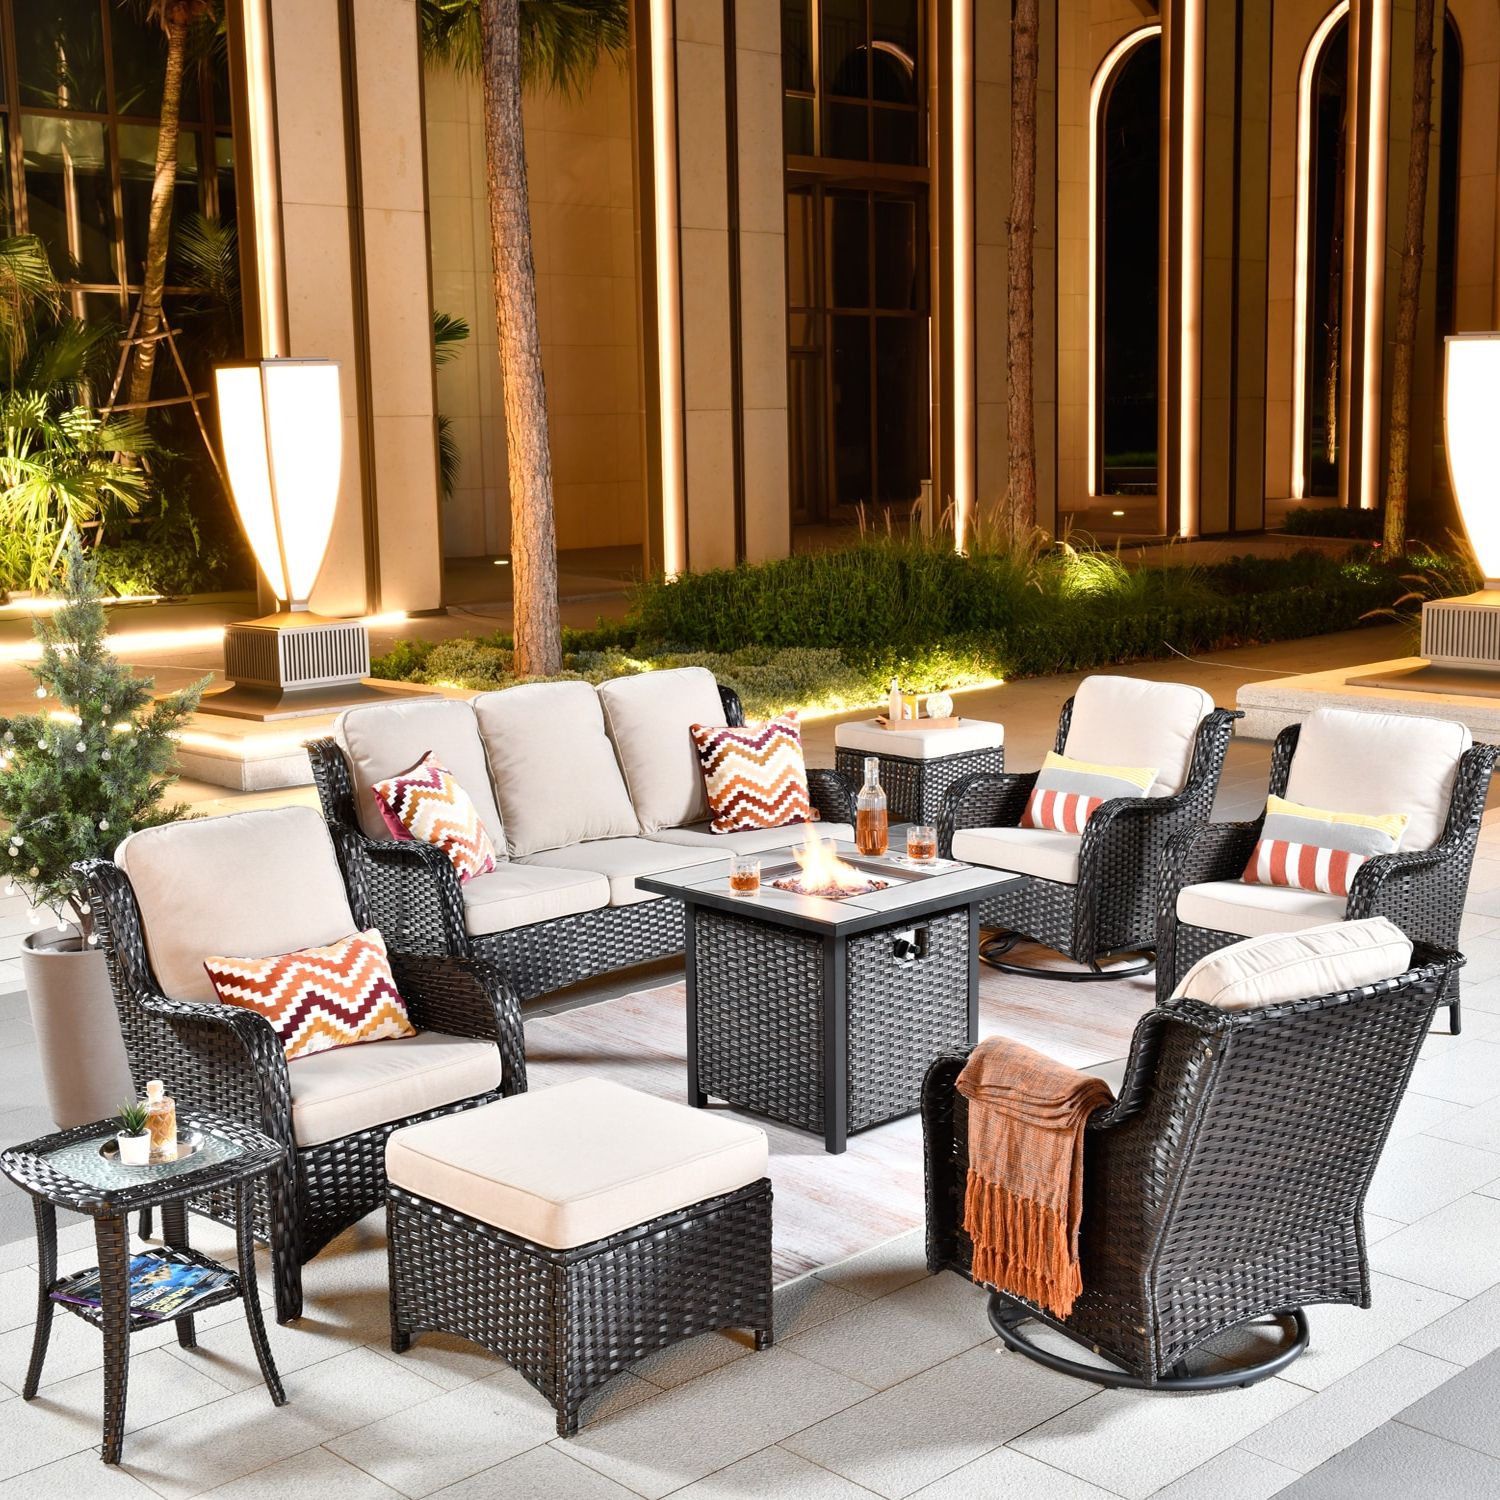 Most Popular Ovios 9 Piece Rattan Patio Furniture Set Wicker Swivel Rocking Chairs  Sectional Sofa Set With Ottomans And Gas Fire Pit Table (brown Wicker,beige  Cushions) In The Patio Conversation Sets Department At Lowes Pertaining To Rocking Chairs Wicker Patio Furniture Set (View 7 of 15)